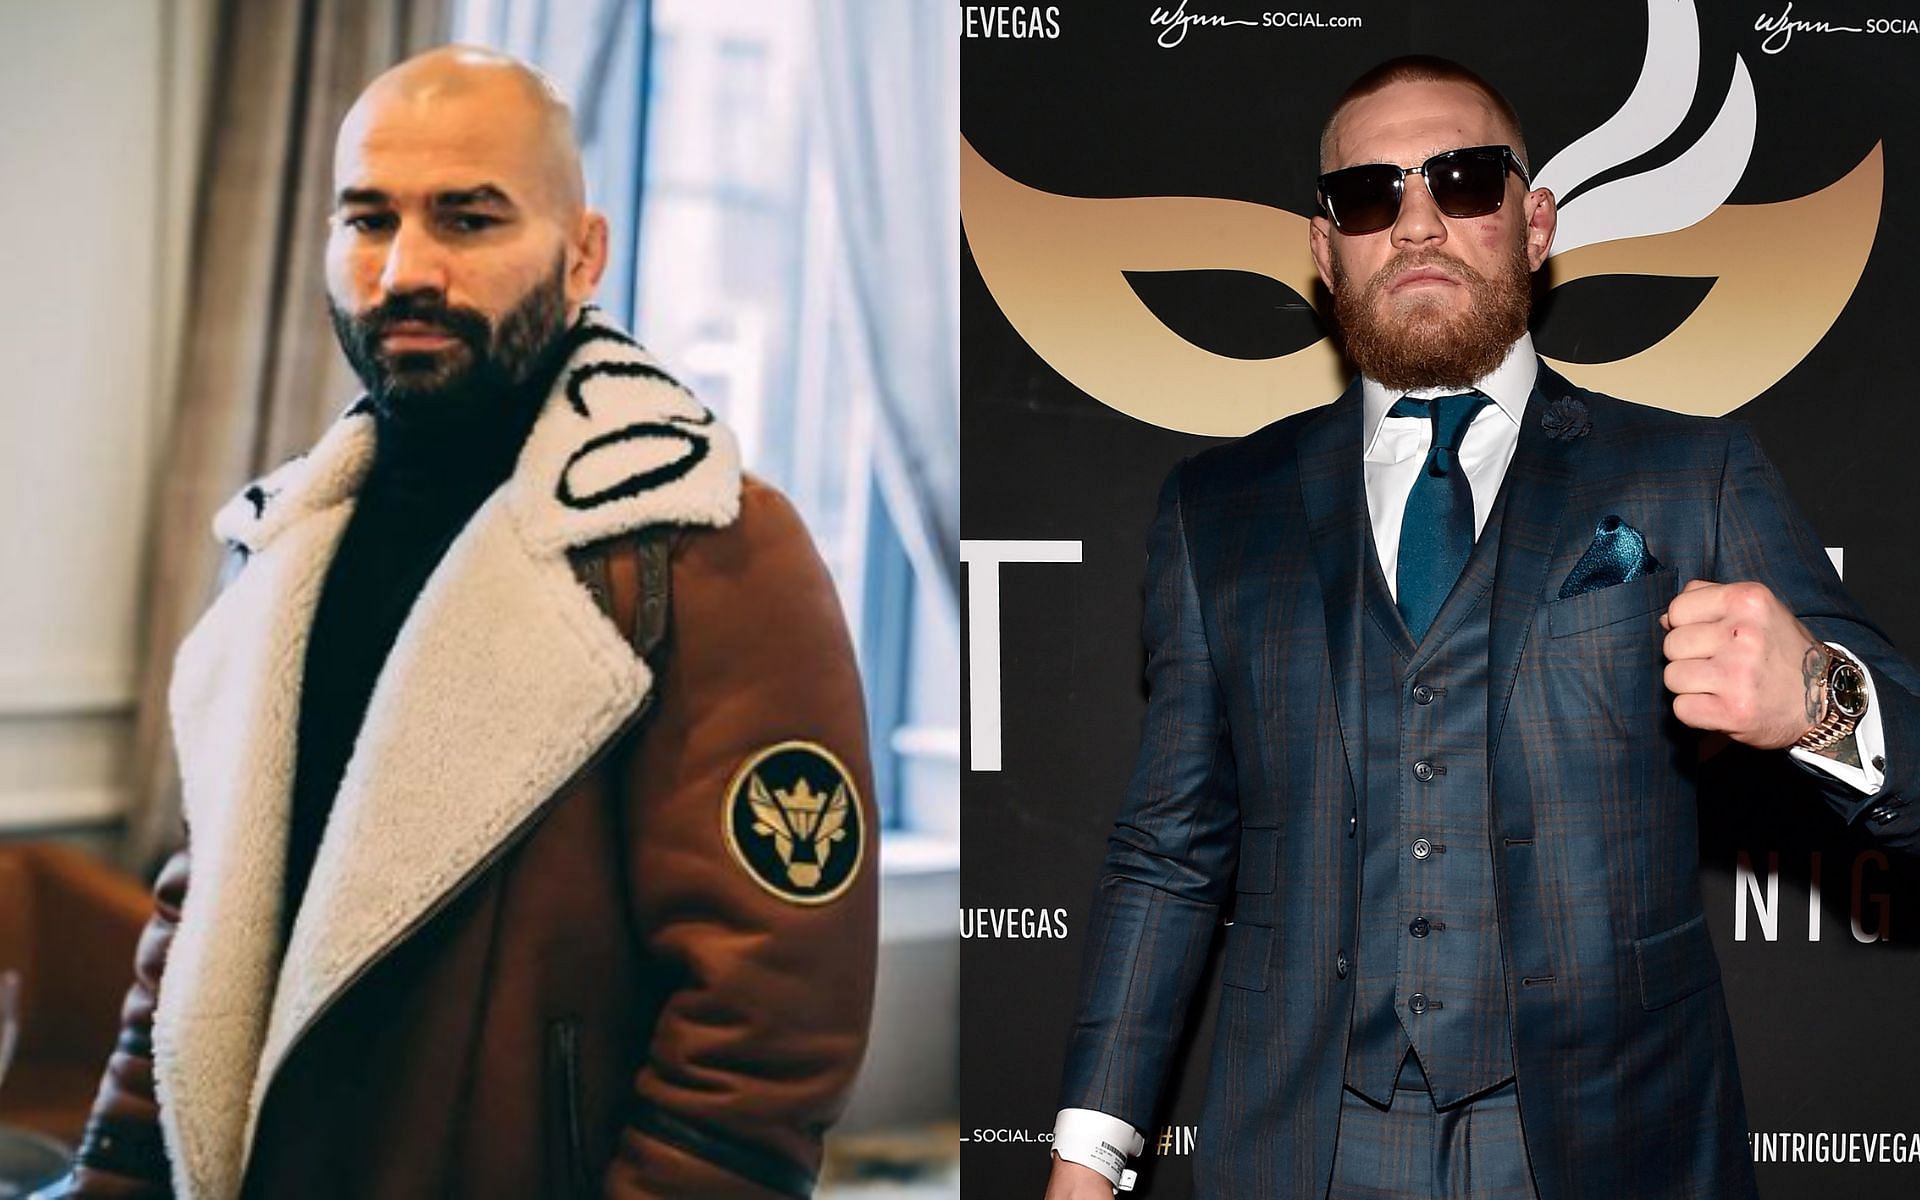 Aretm Lobov (left) and Conor McGregor (right) (Image credits Getty Images and @RushHammerMMA on Twitter)